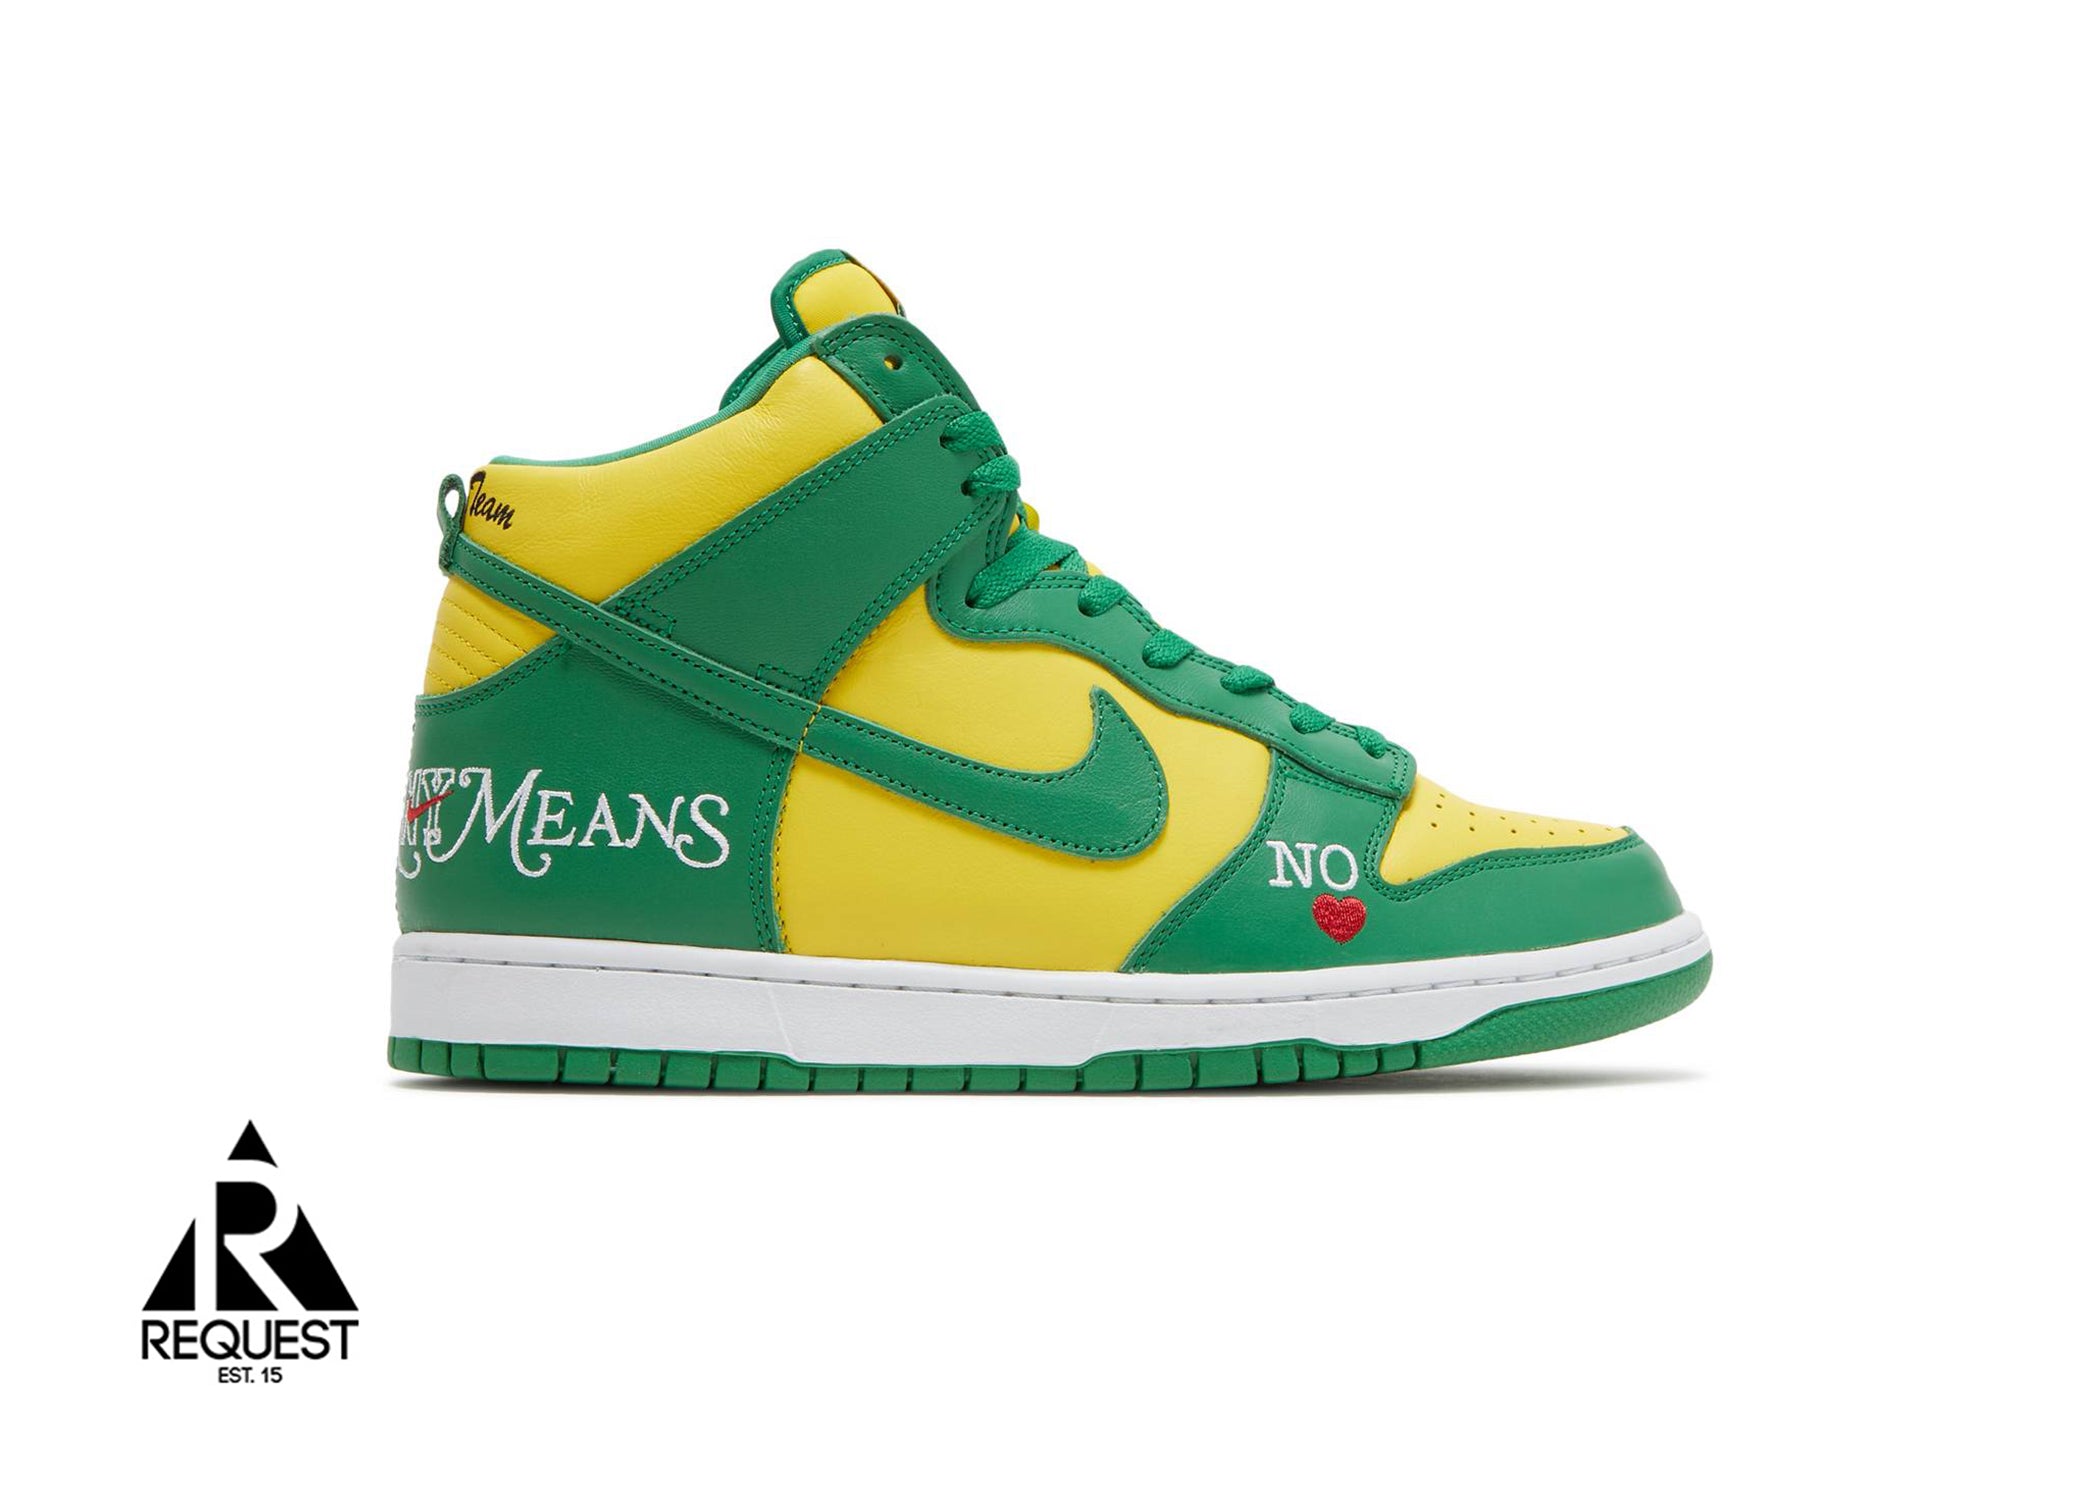 Nike SB Dunk High “Supreme By Any Means Brazil”